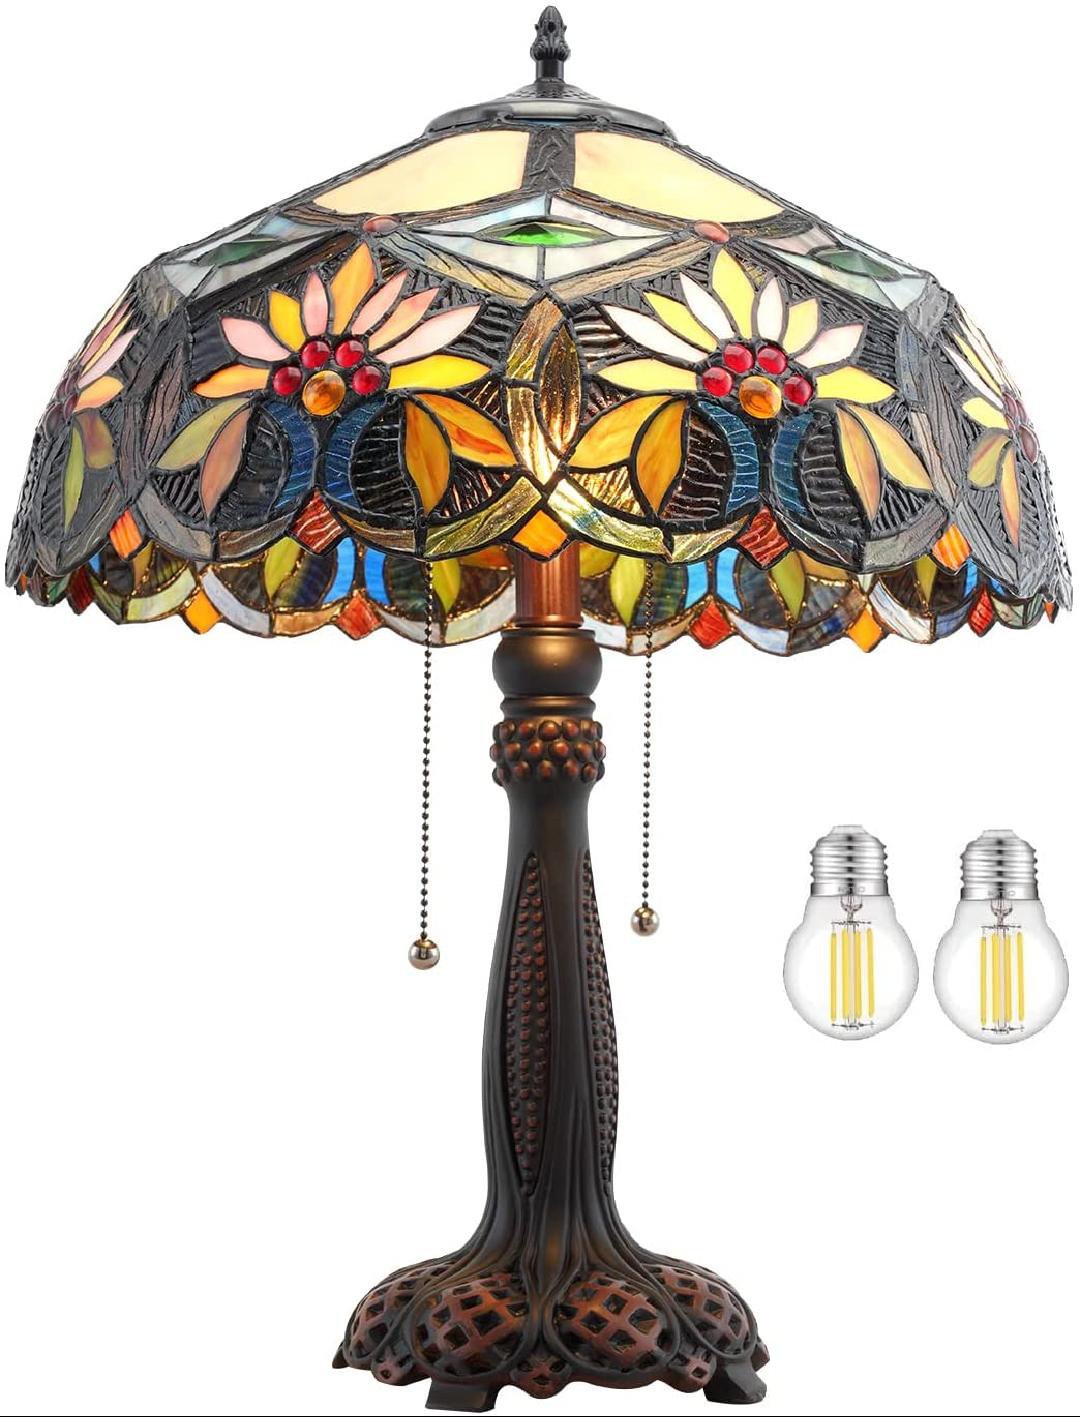 Tiffany Style Table Lamp, 23" Tall Vintage Base Rustic Large Tiffany Lamp Bedside, Large Luxurious Unique Desk Light Stained Glass Shade, For Lover Bedroom Living Room Country Farmhouse